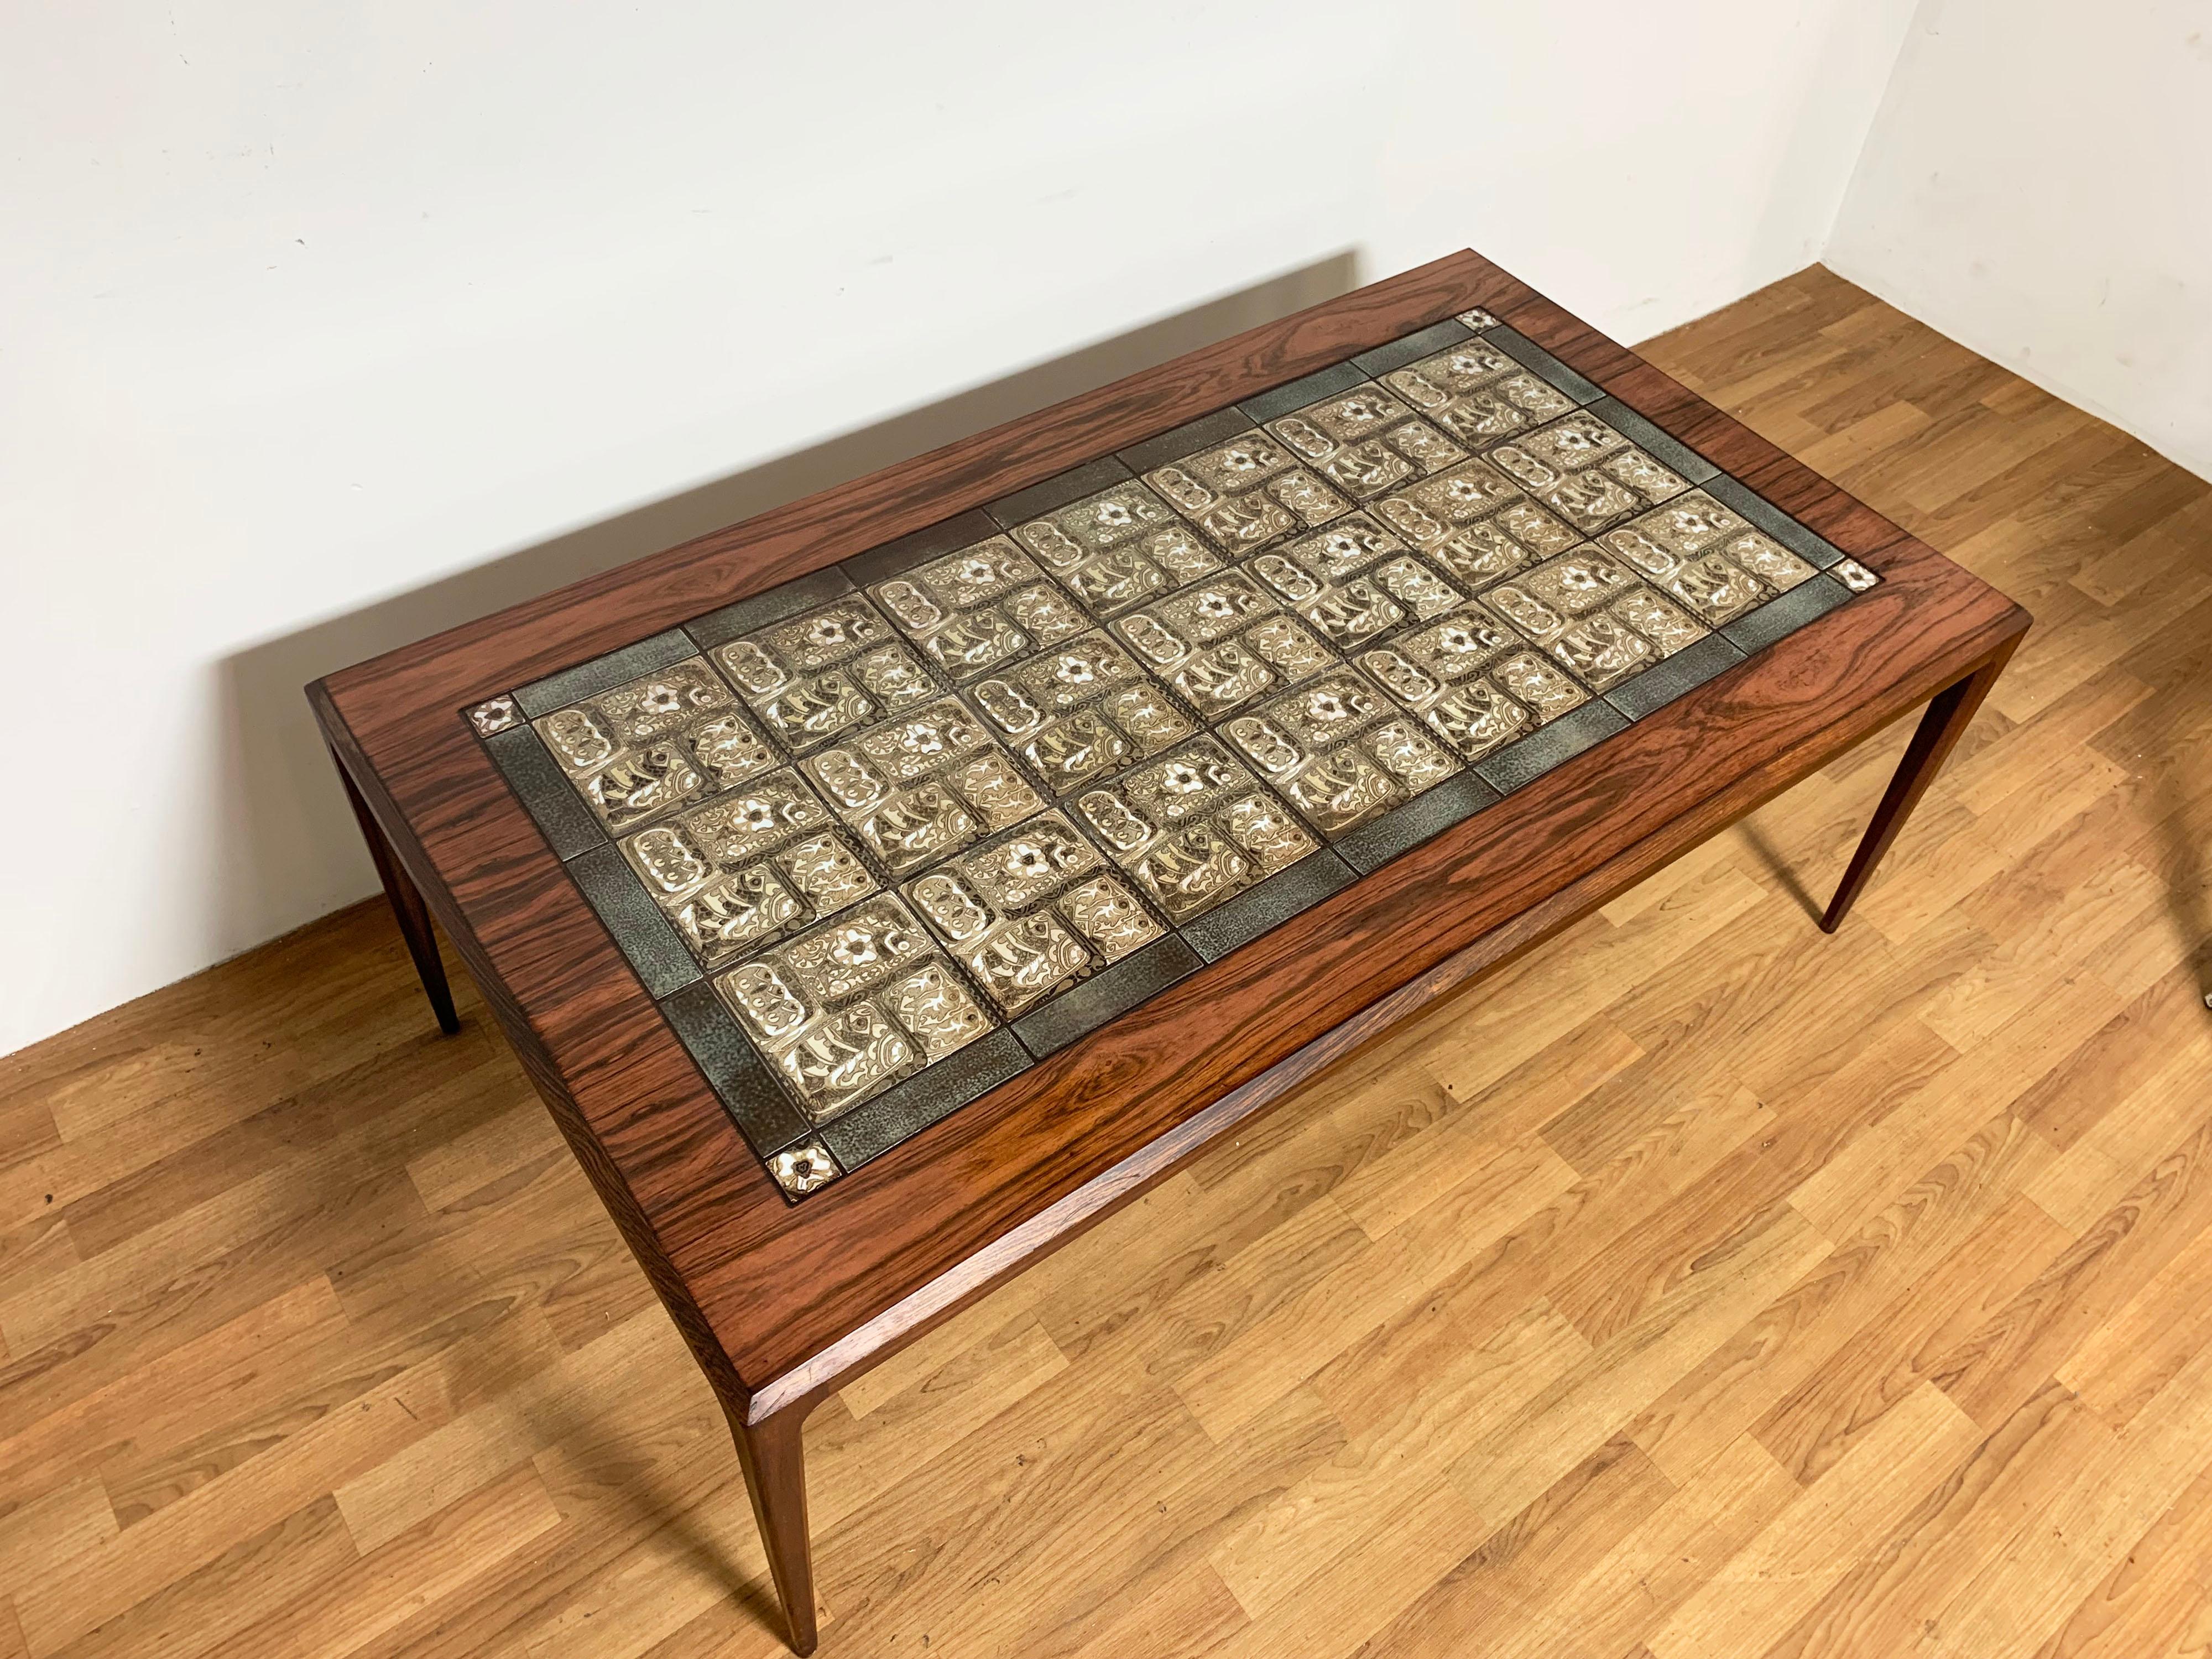 Danish rosewood coffee table designed by Johannes Andersen for C. F. Christensen, featuring classic Royal Copenhagen BACA tiles by Nils Thorsson, circa 1960s.